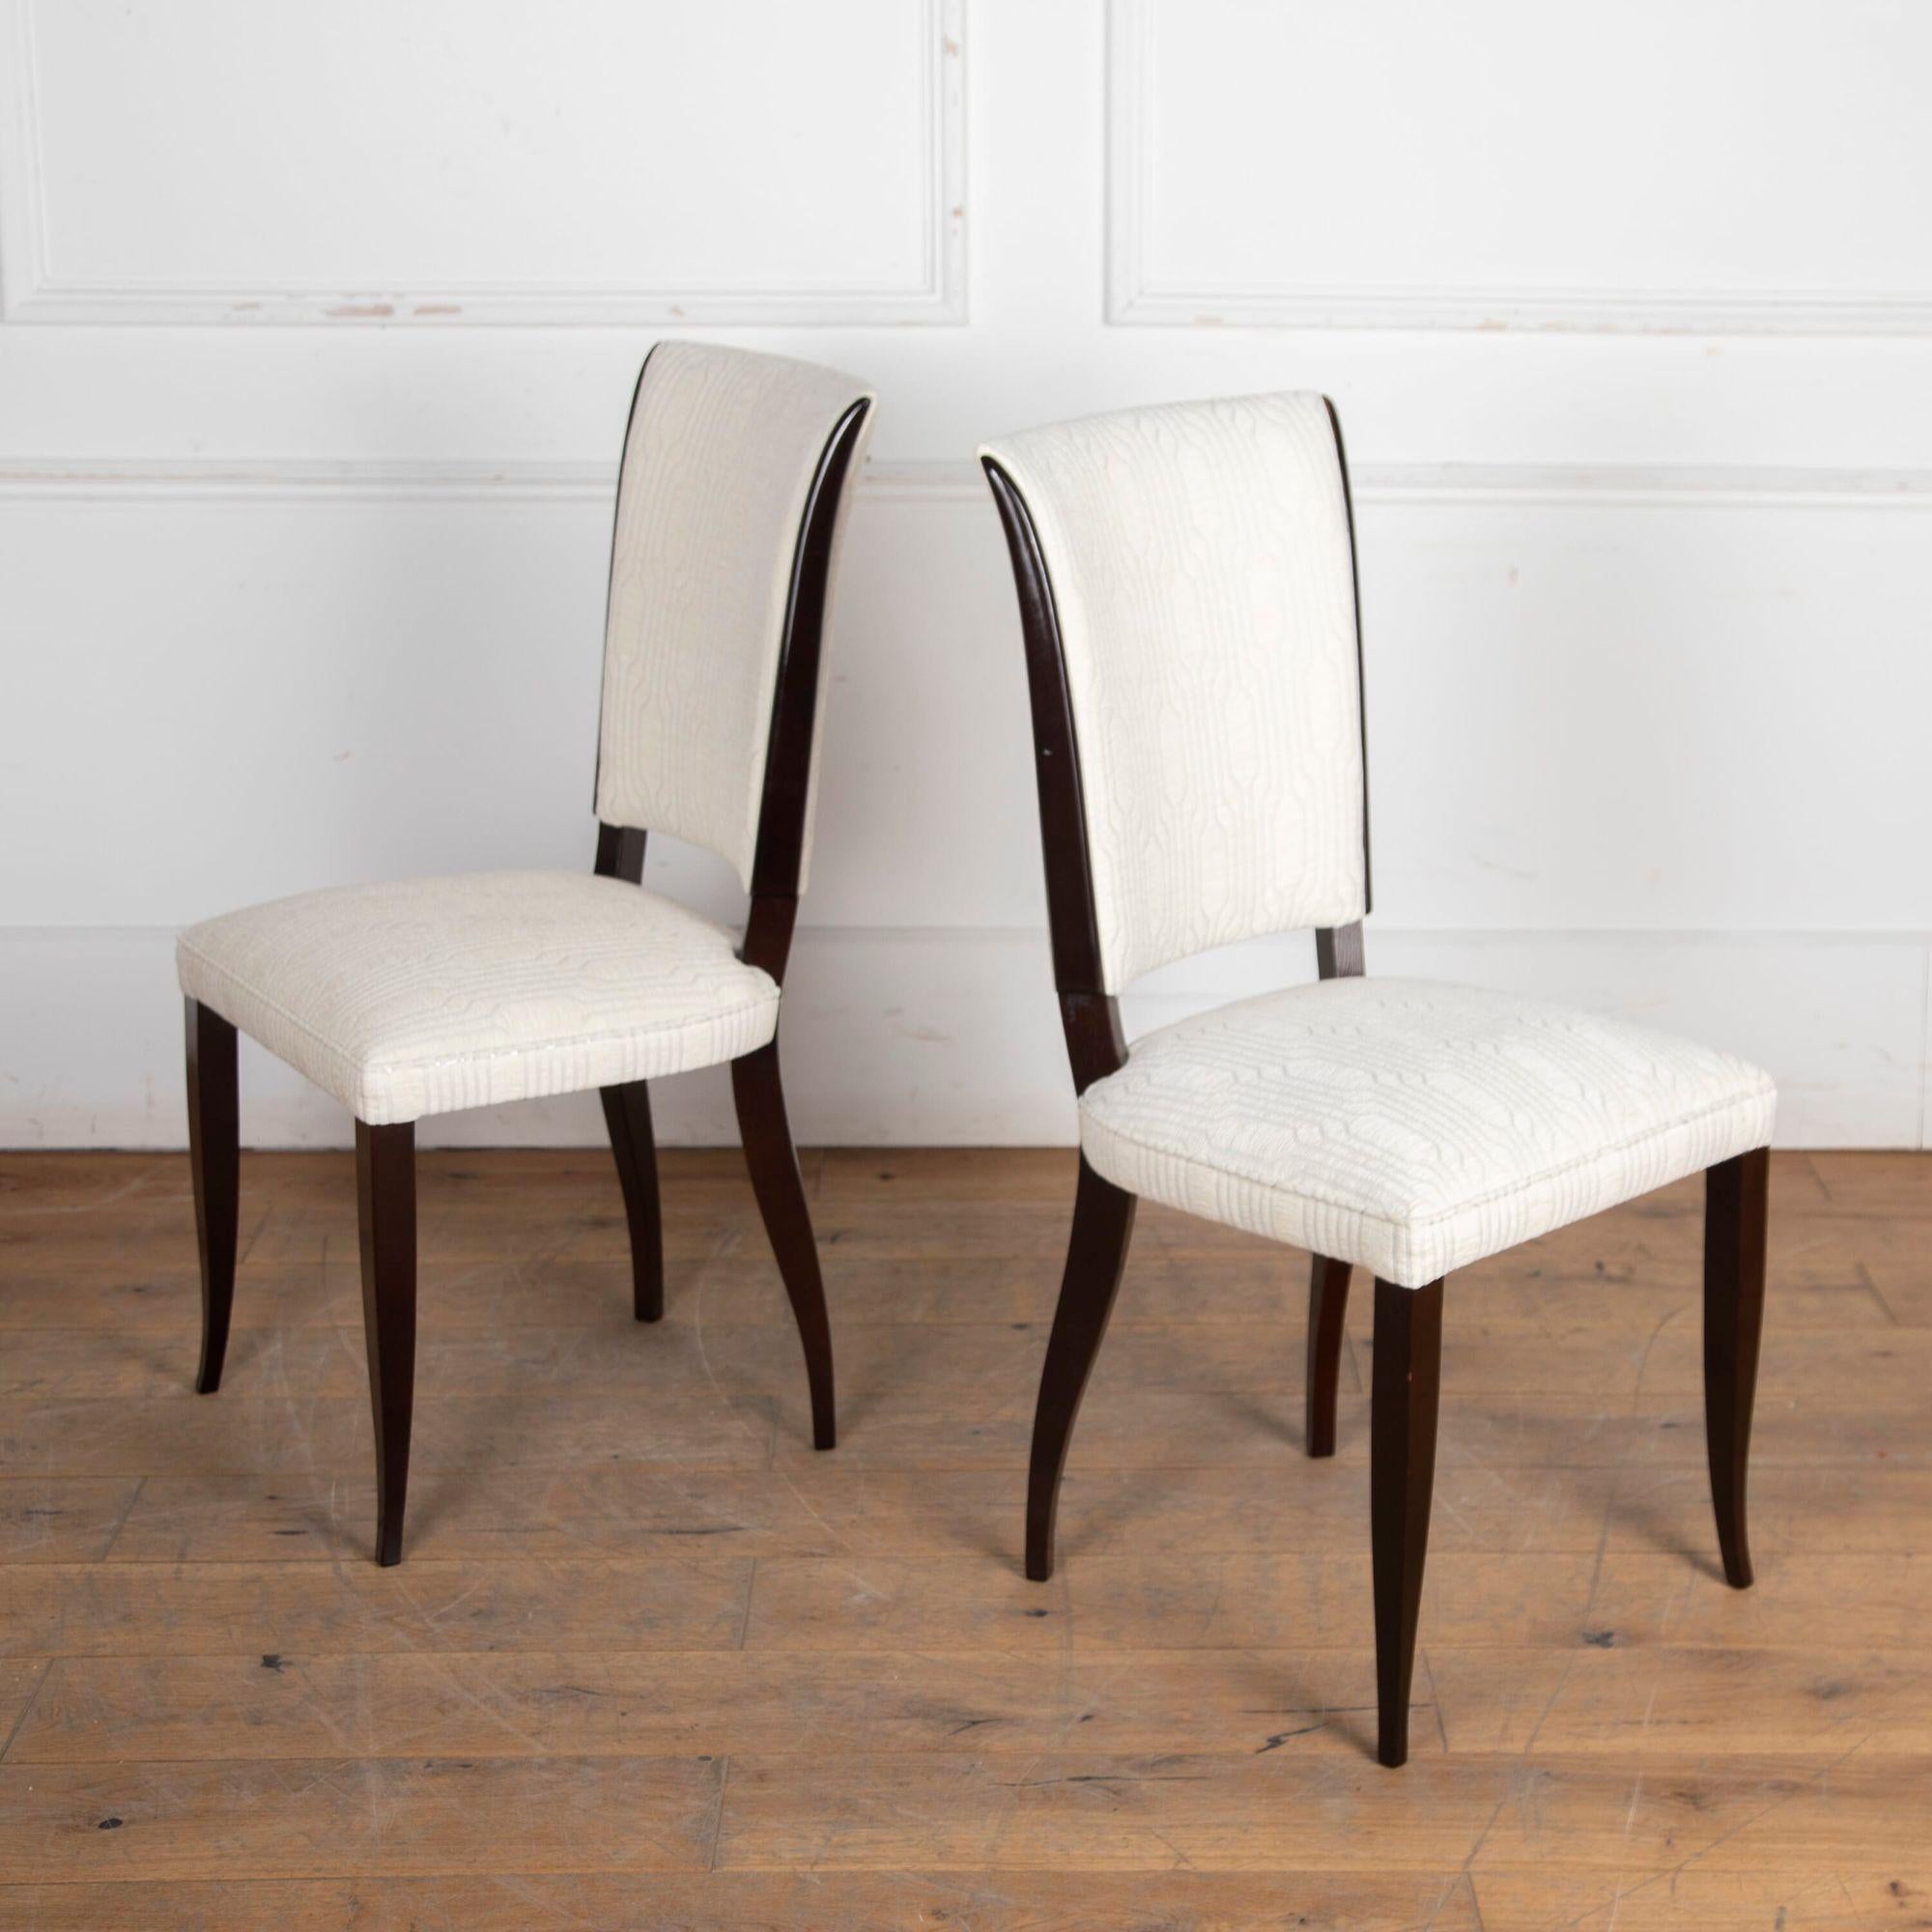 A wonderful set of six French art deco dining chairs. 
Each seat is covered with off-white velvet upholstery, that is attractively worn and will stand the test of time. 
In good structural condition for their age. 
Would look fantastic in both